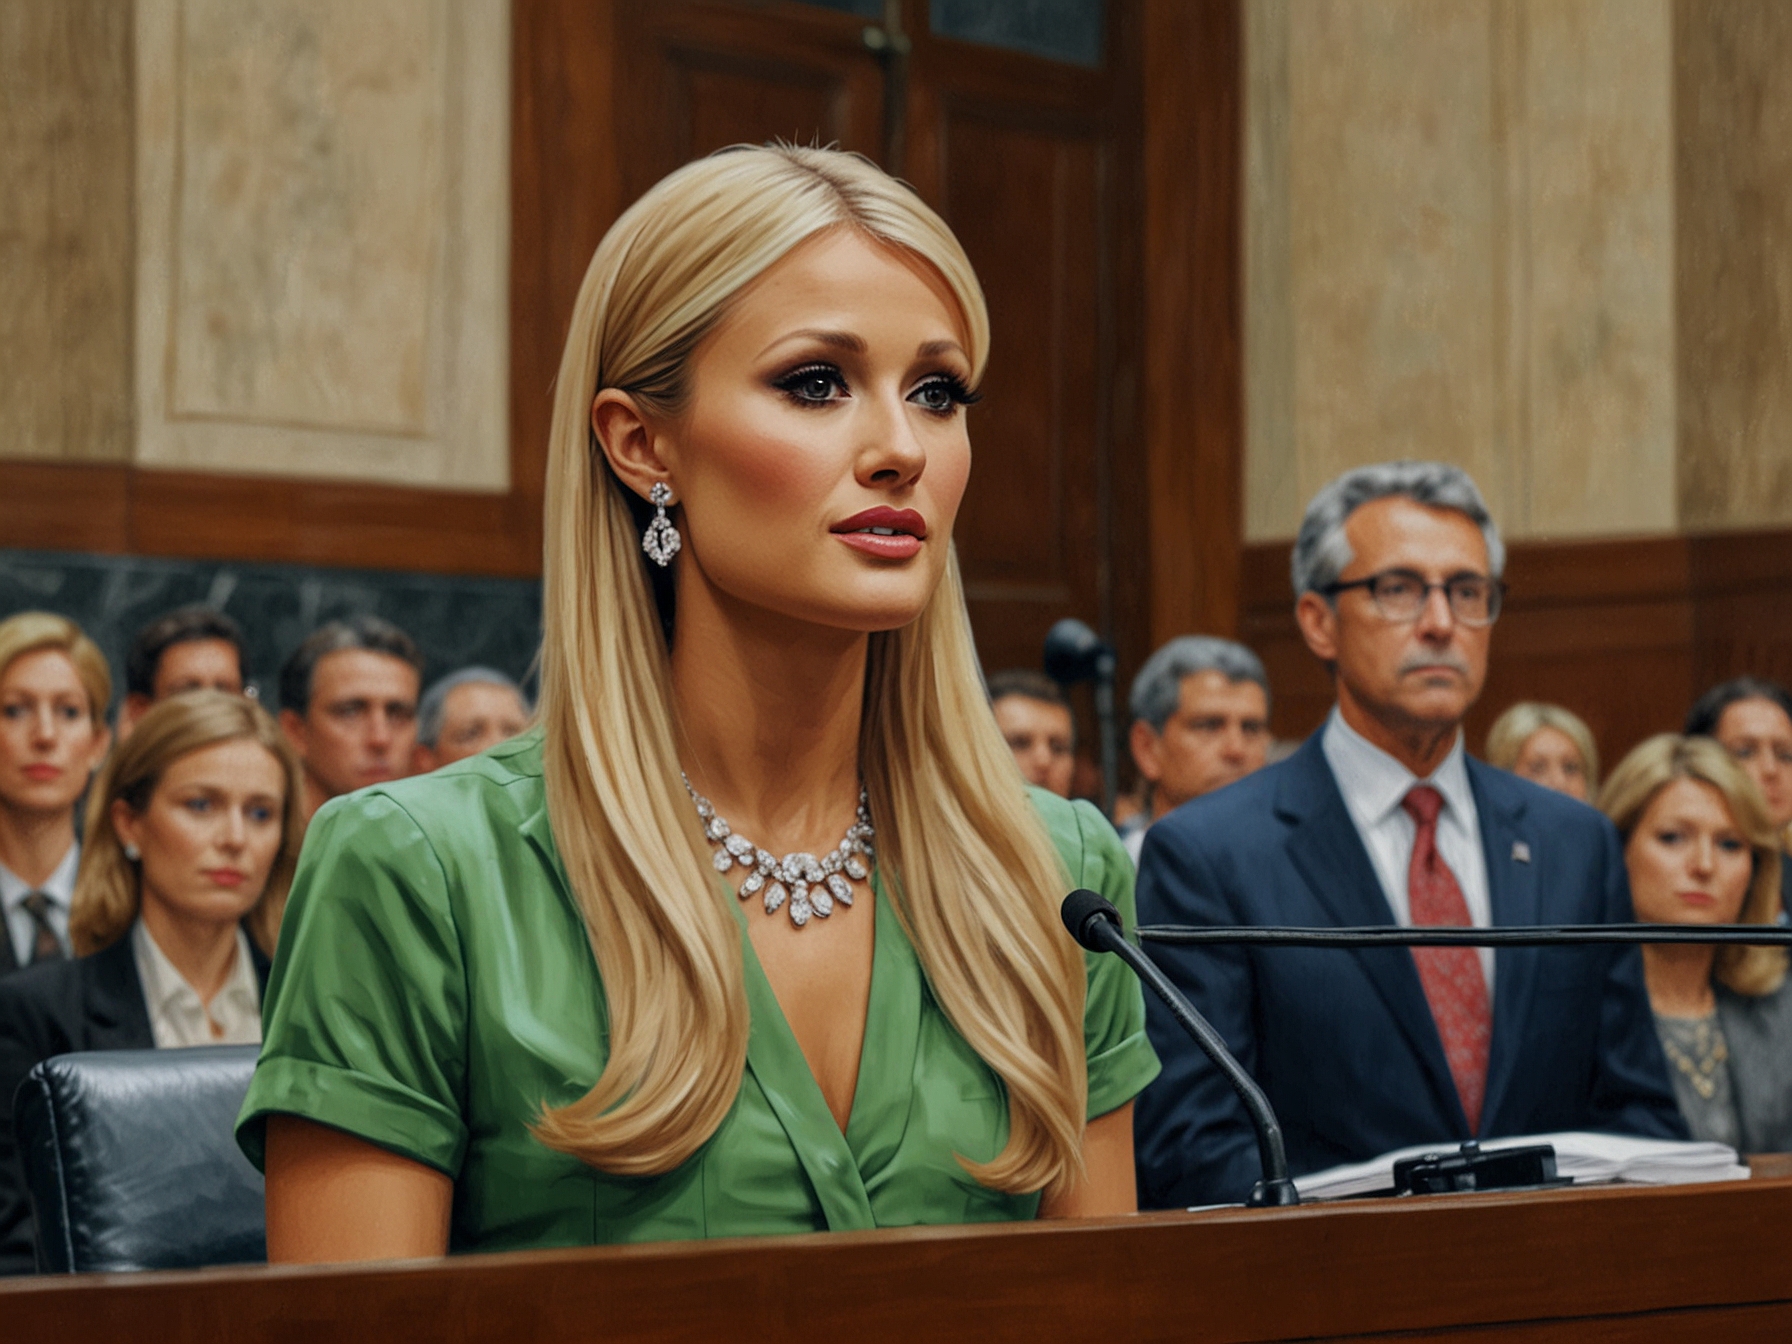 Paris Hilton confidently addressing the congressional hearing with poise and a commanding presence, highlighting her advocacy against child abuse and the need for legislative action.